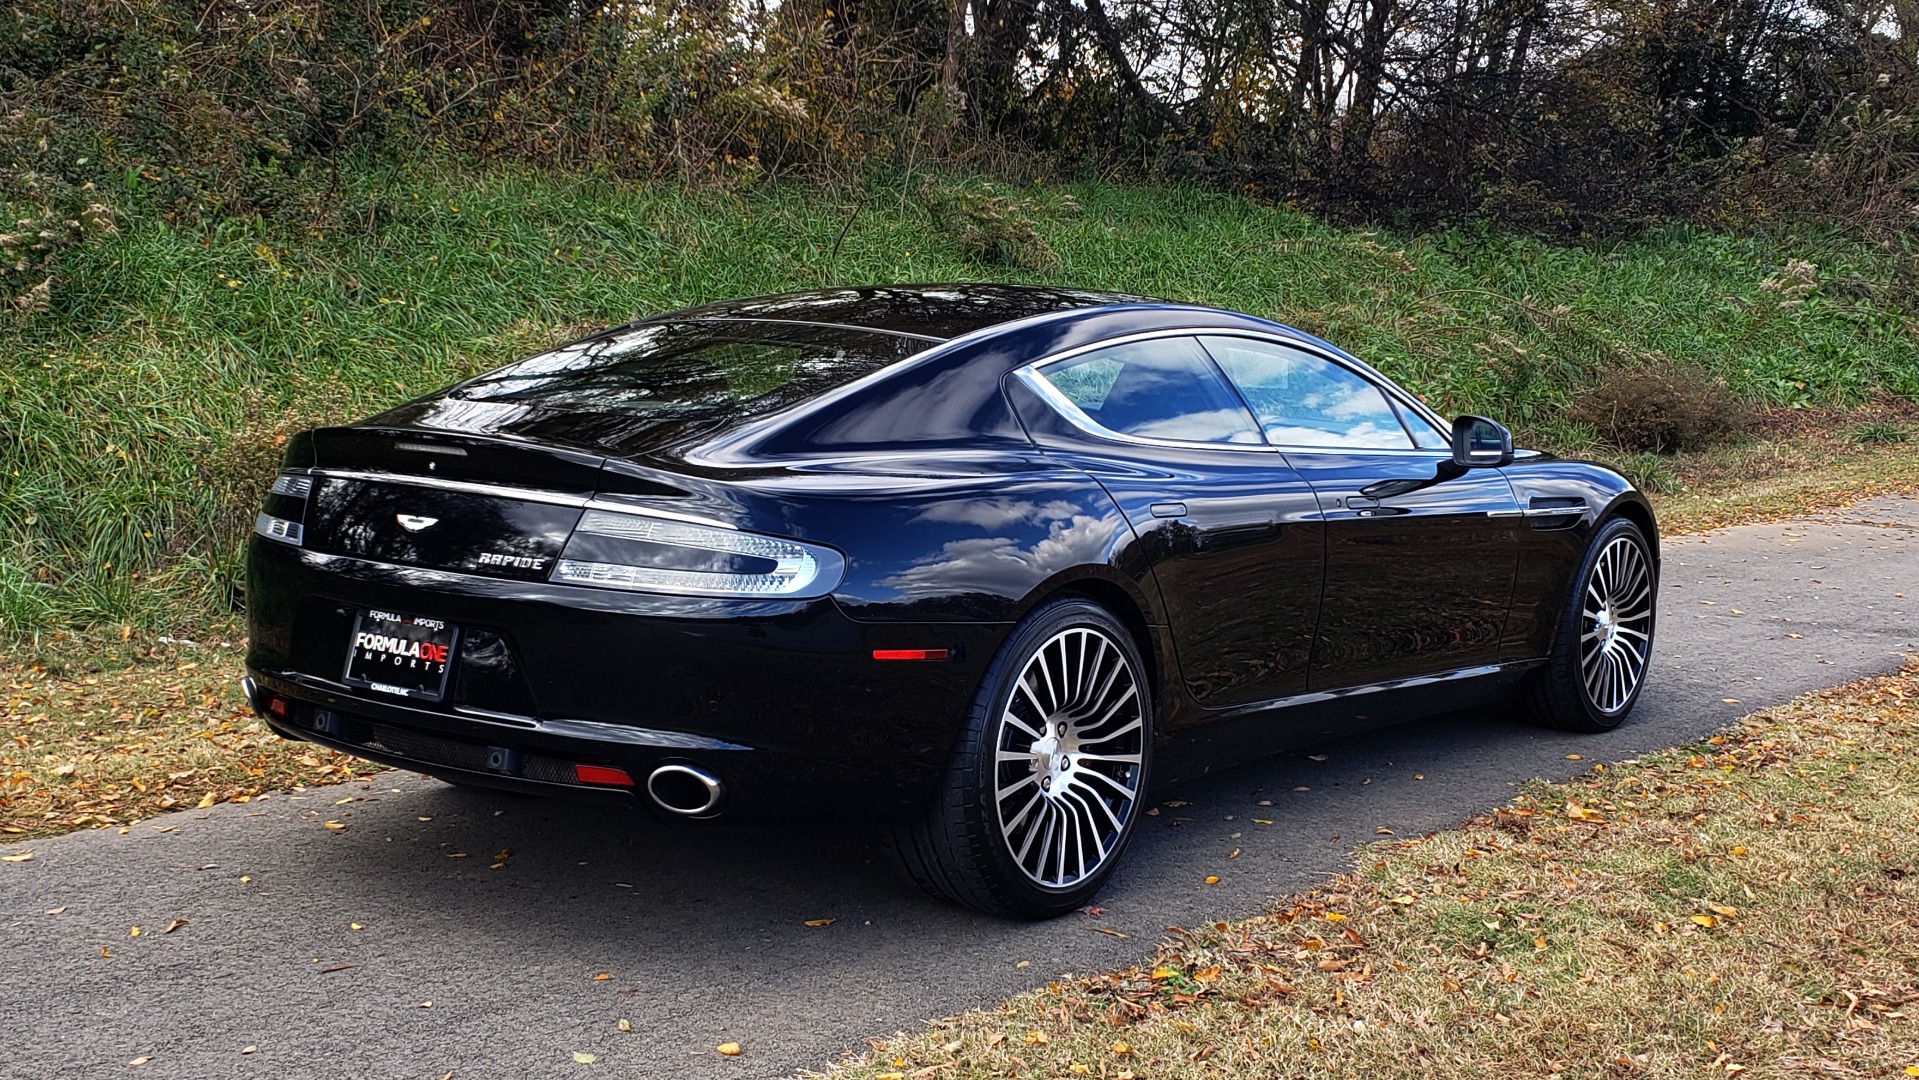 Used 2012 Aston Martin RAPIDE LUXURY 6.0L V12 / NAV / B&O SND / ENTERTAINMENT / REARVIEW for sale Sold at Formula Imports in Charlotte NC 28227 6